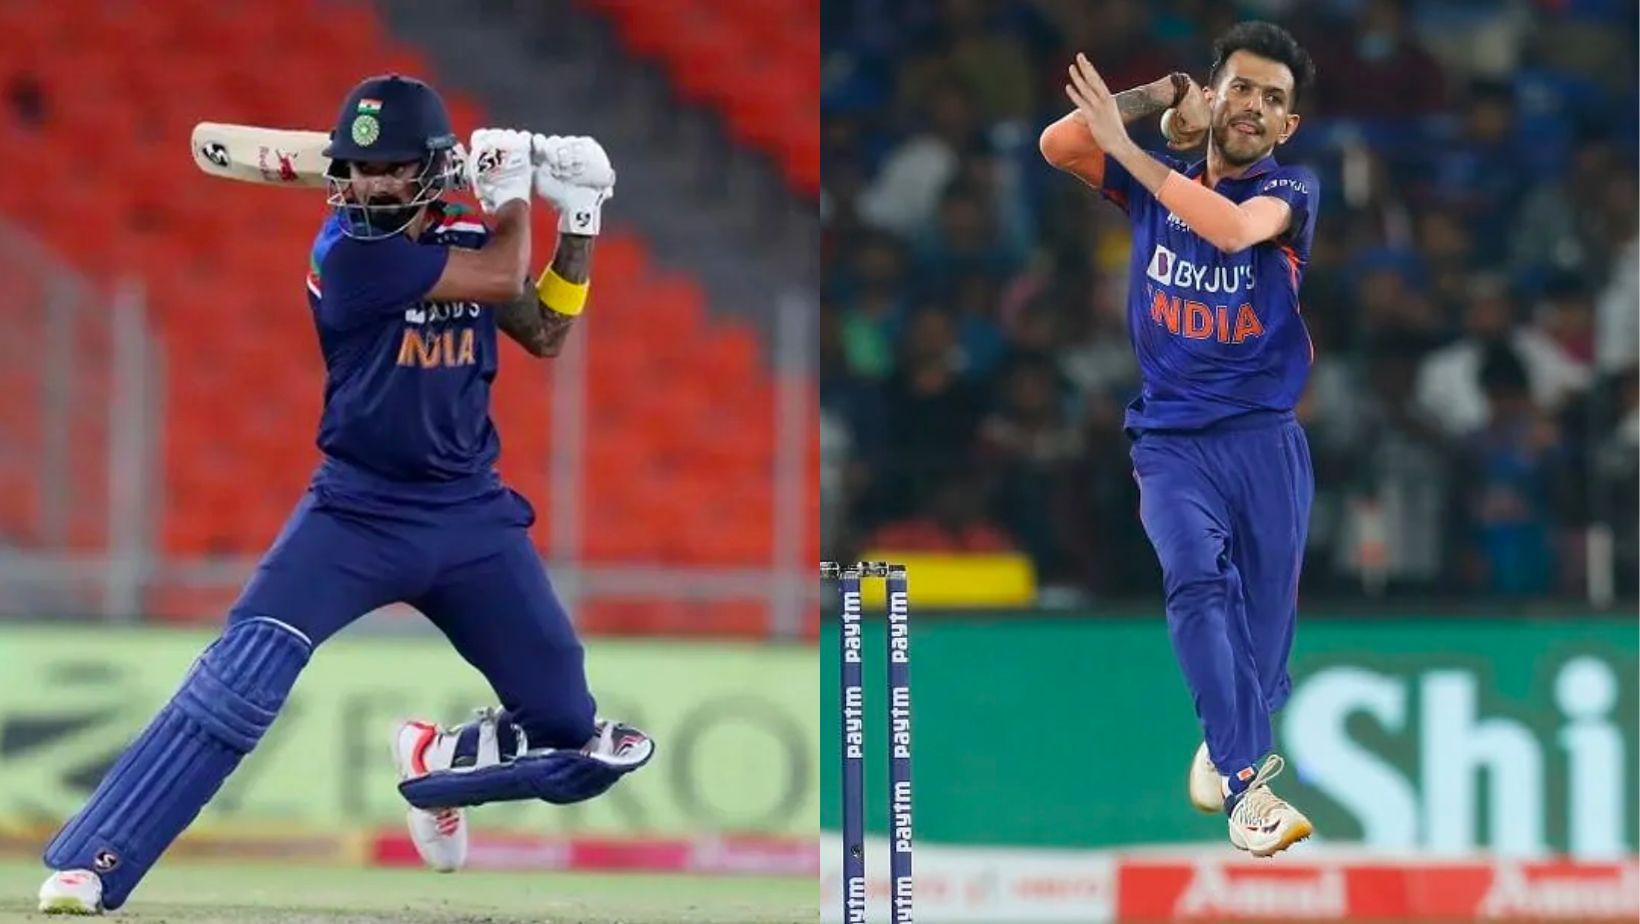 KL Rahul and Yuzvendra Chahal both made rapid strides after their debut in Zimbabwe.